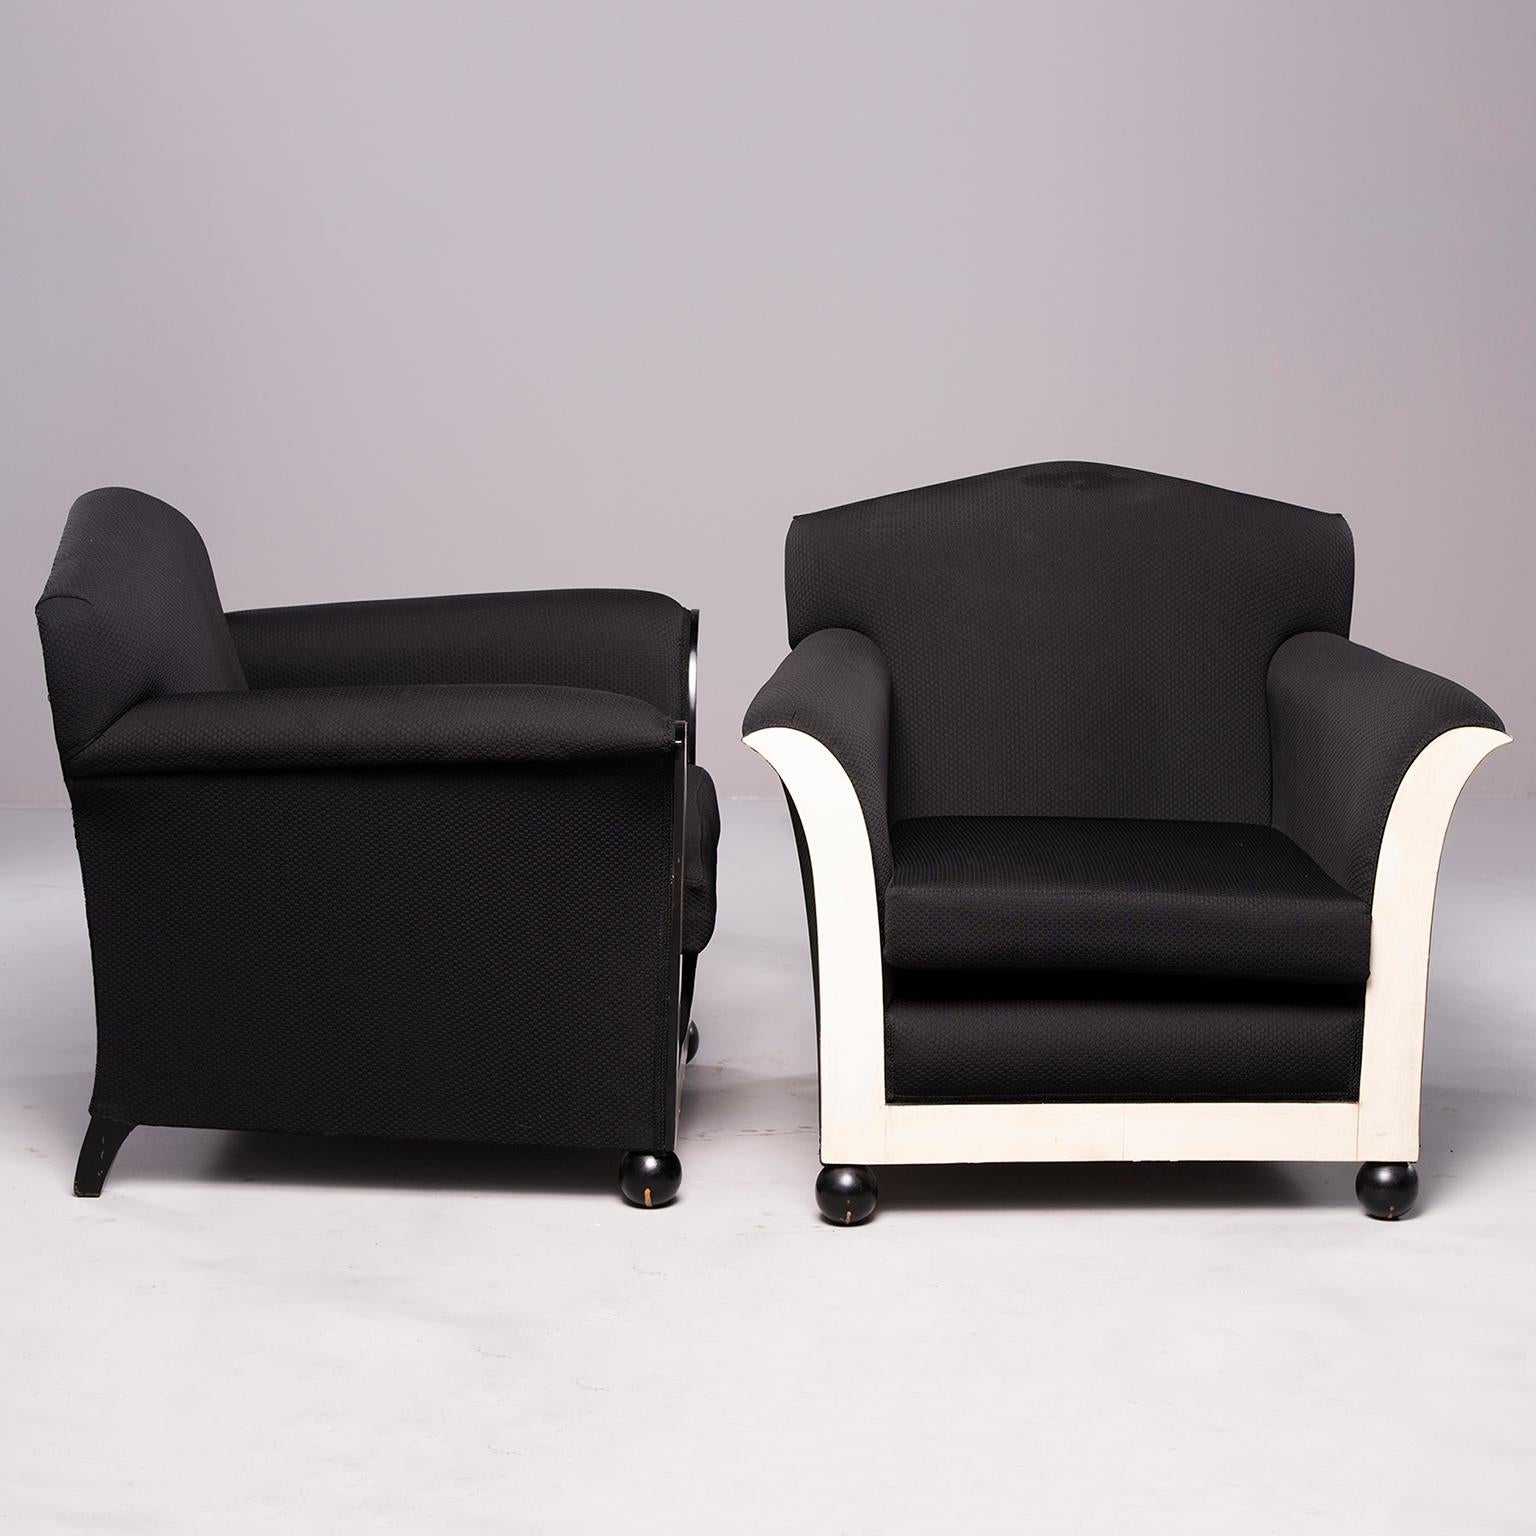 Pair of French club chairs with black upholstery, circa 1930s. Front of chairs feature ball feet and flared arms with contrasting off-white vellum inserts. Sold and priced as a pair. 

Measures: Arm height 23.25” 
Seat height 14.5”
Seat depth